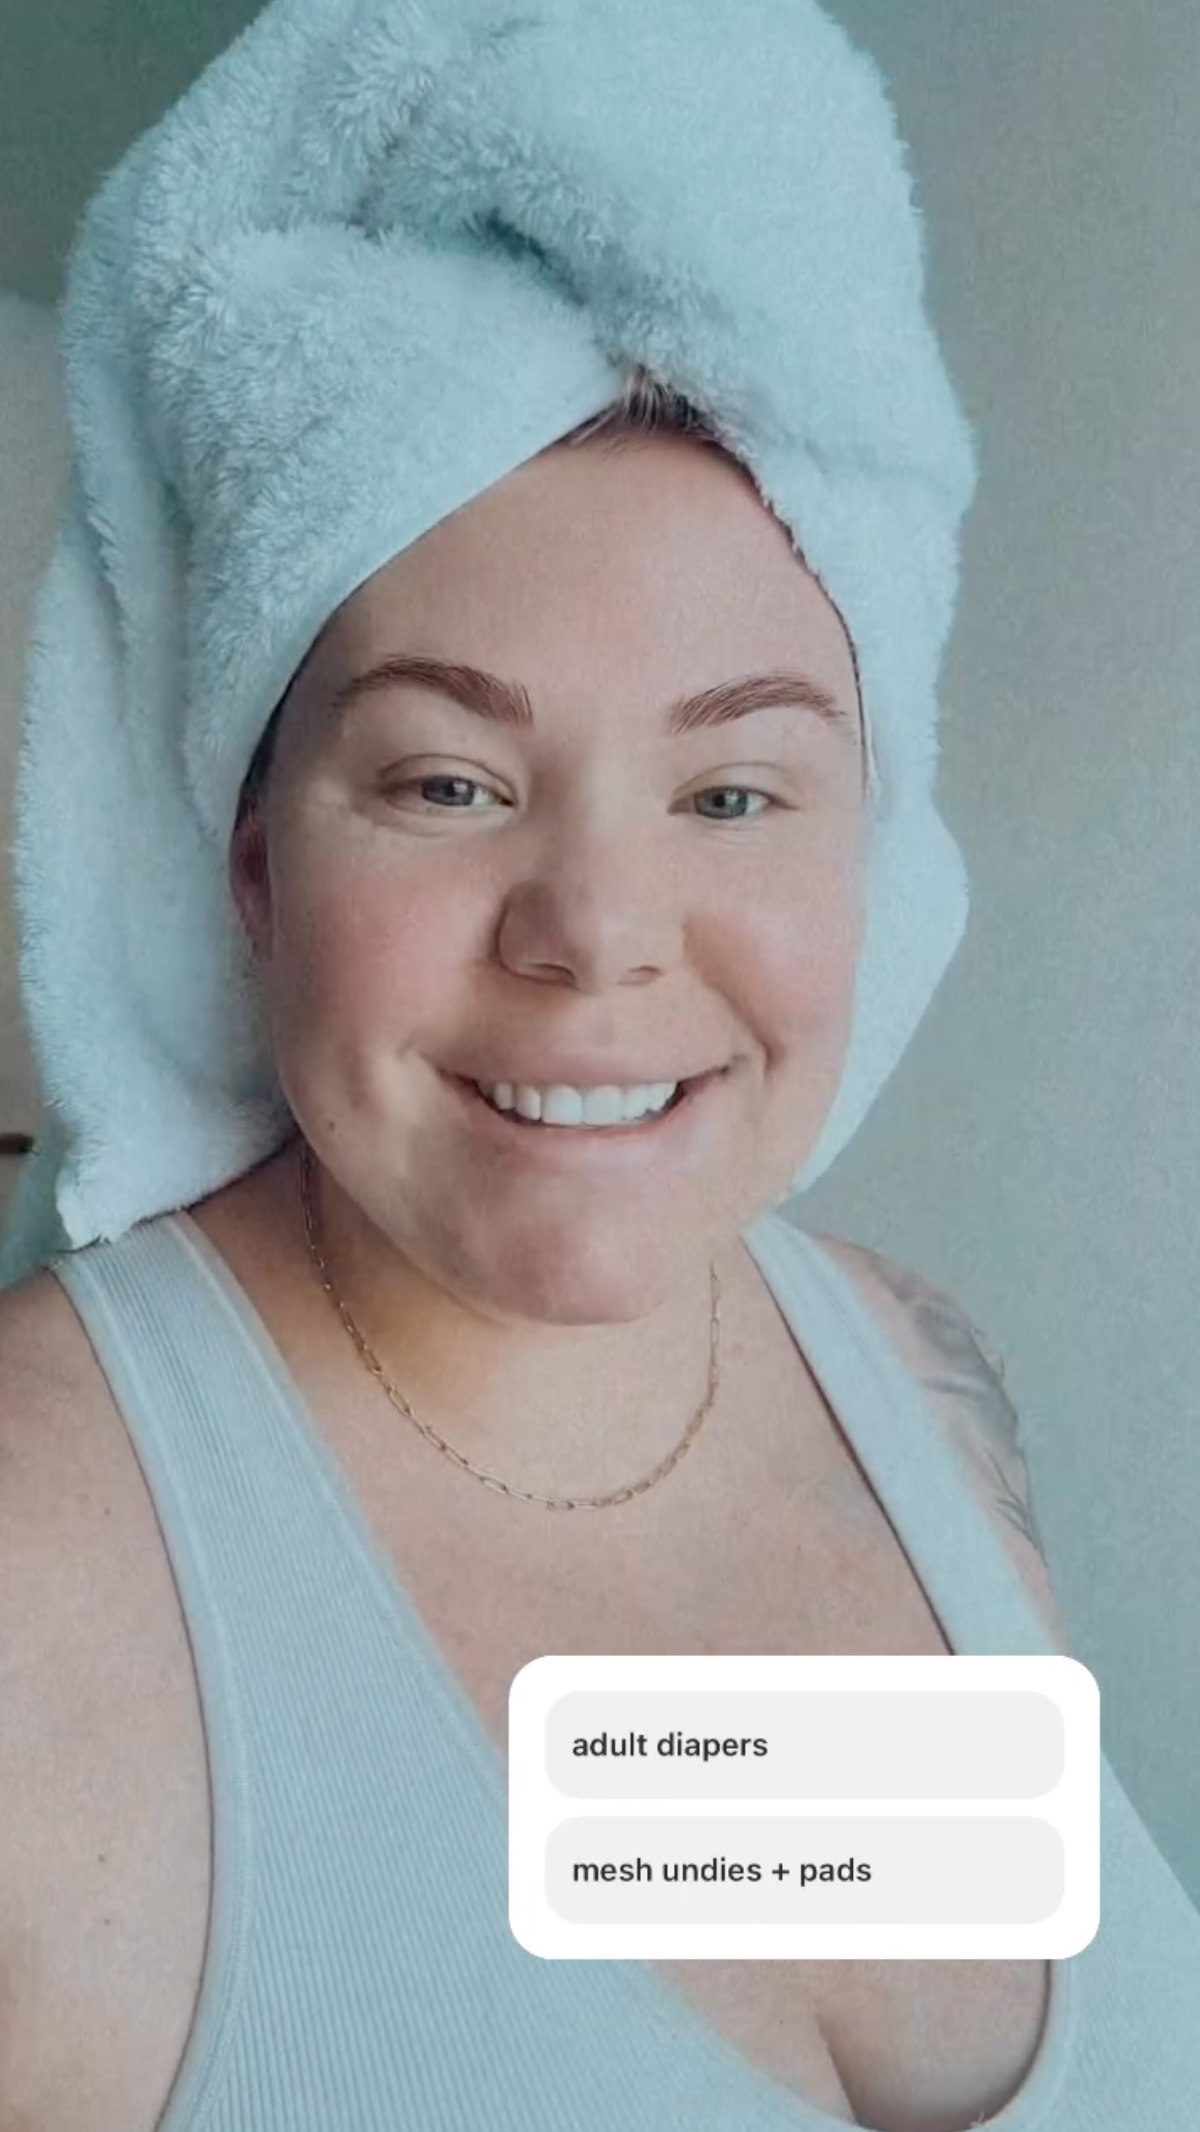 Kailyn revealed in her Instagram Stories that pregnant women who are going to give birth should wear adult diapers